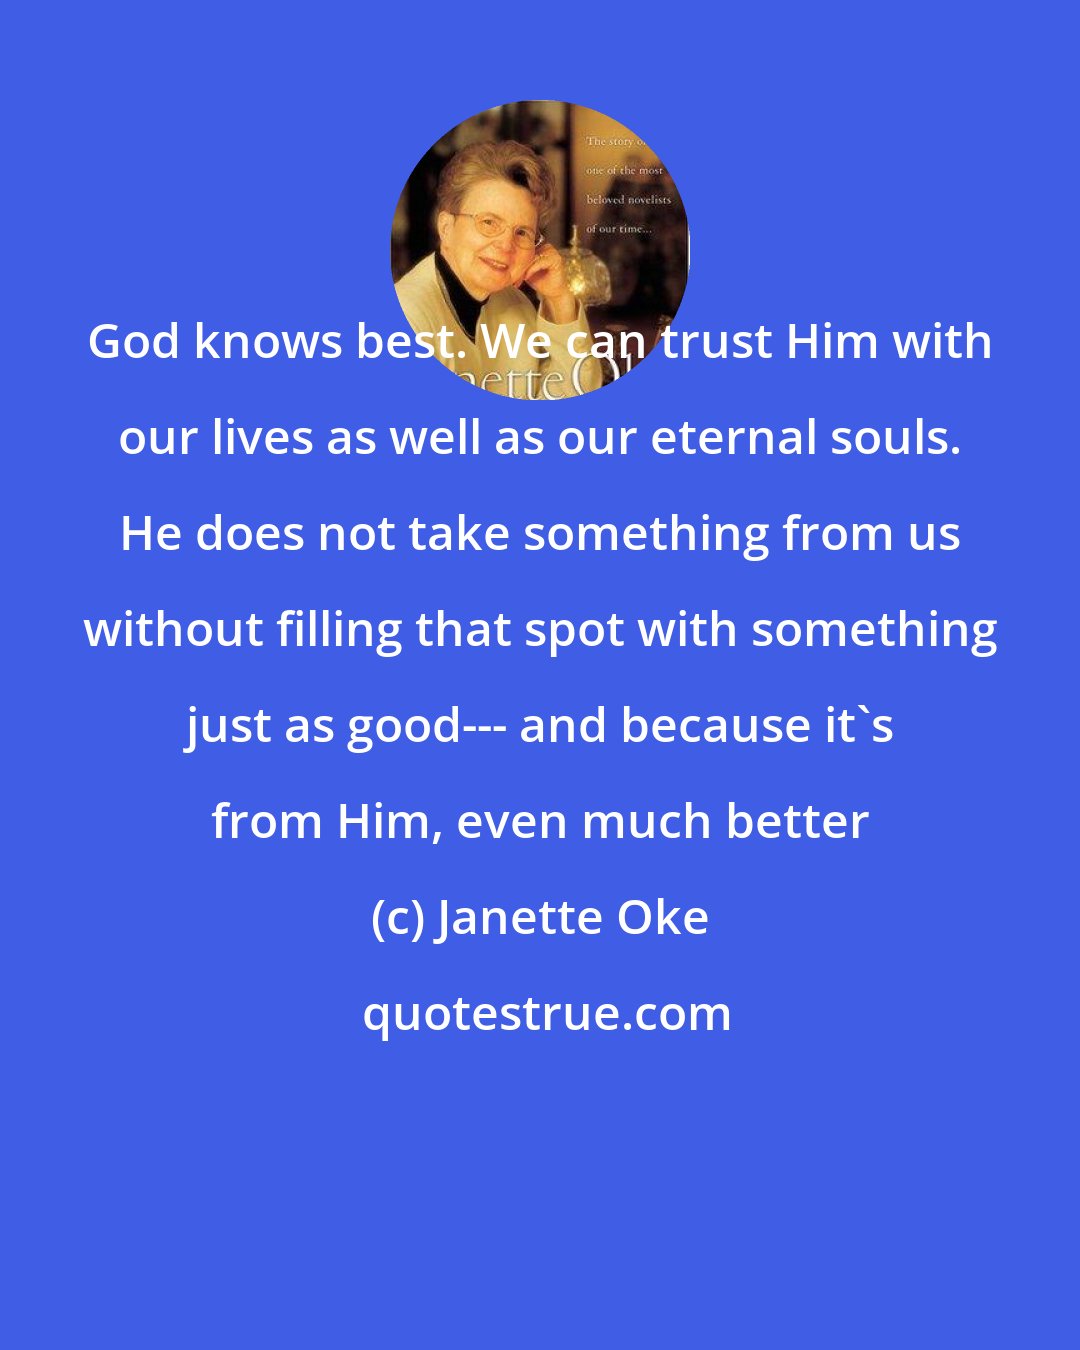 Janette Oke: God knows best. We can trust Him with our lives as well as our eternal souls. He does not take something from us without filling that spot with something just as good--- and because it's from Him, even much better